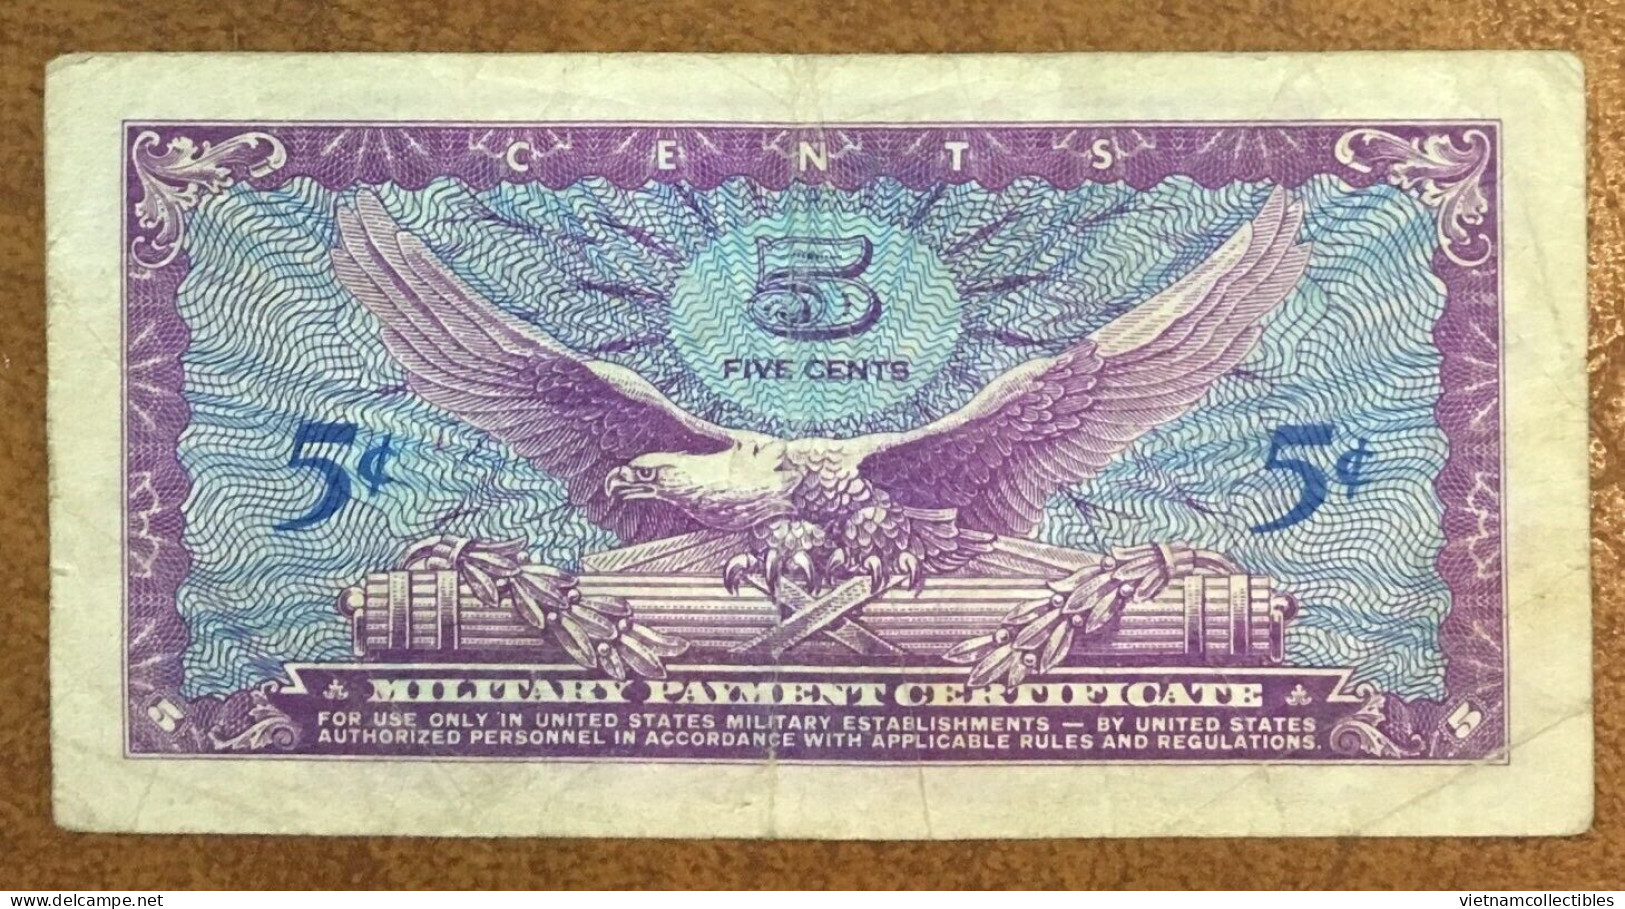 USA MPC 5 Cents Military Payment Series 641 VF Banknote Note 1964 Using In Vietnam Viet Nam - Plate # 1 / 2 Photos - 1965-1968 - Reeksen 641